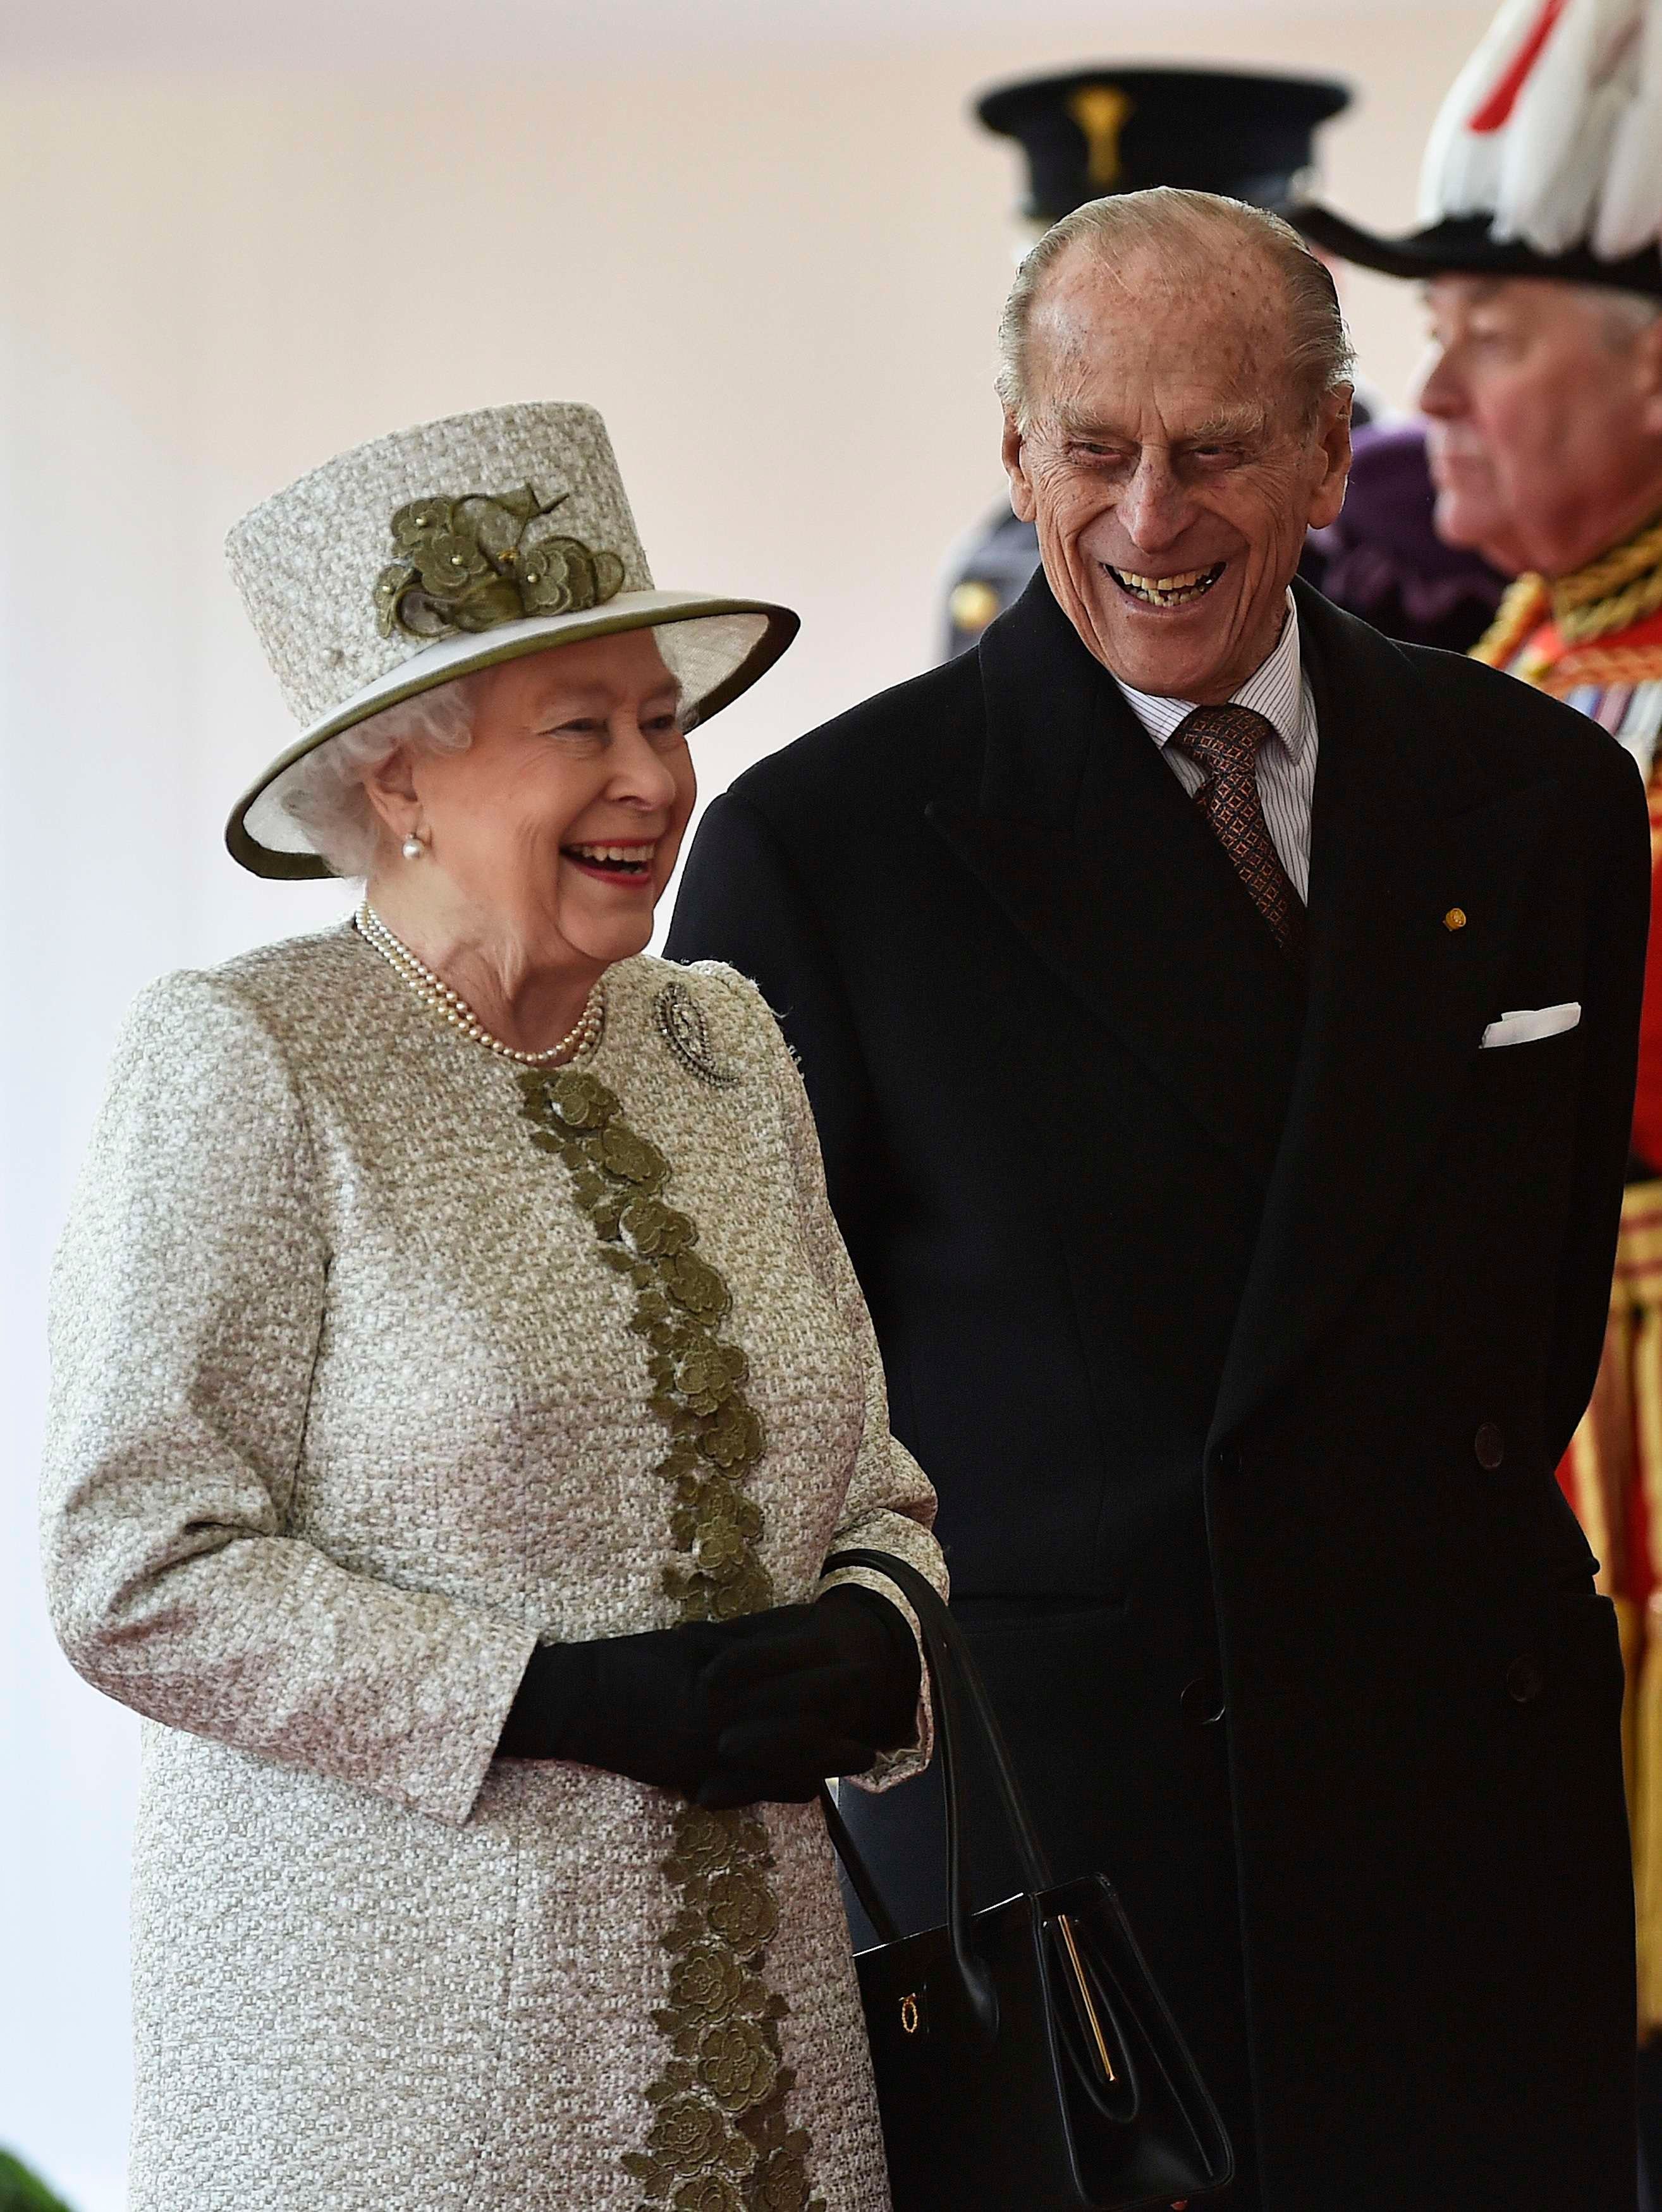 Queen Elizabeth II and Prince Philip at a ceremonial welcome for the State Visit of The President of The United Mexican, Senor Enrique Pena Nieto and Senora Rivera at Horse Guards Parade on March 3, 2015 | Photo: Getty Images